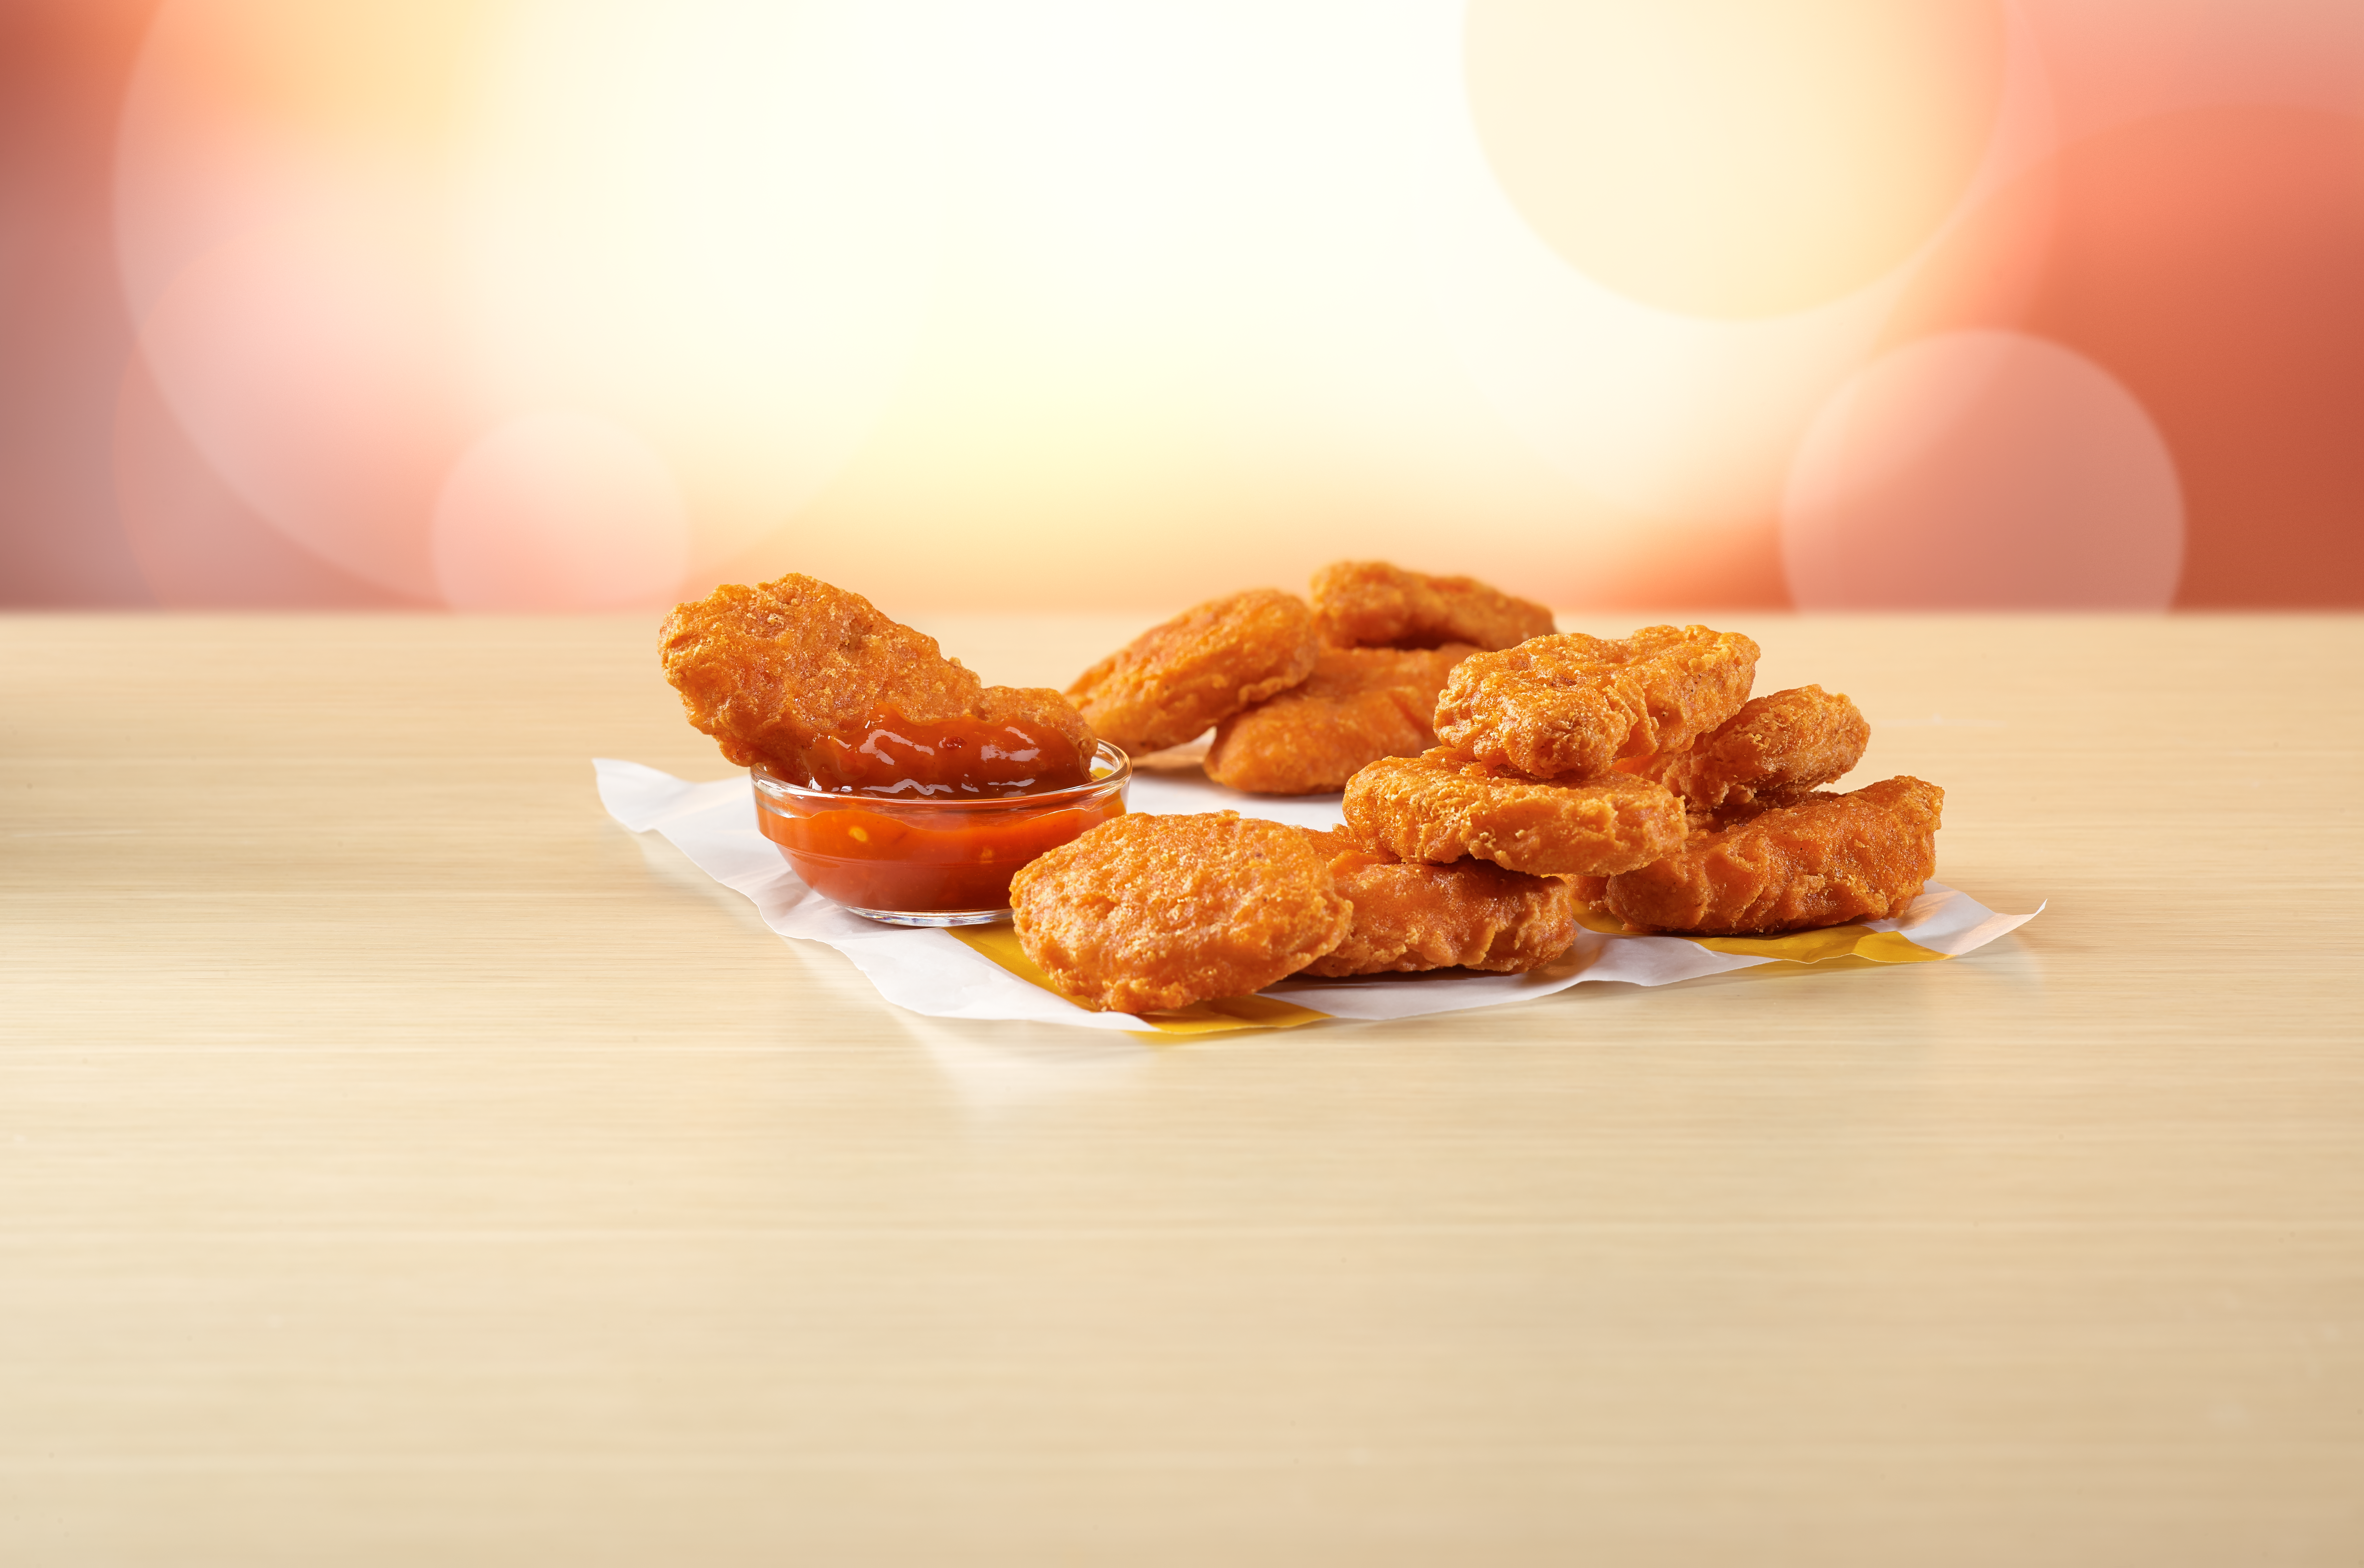 Spicy McNuggets Image 1